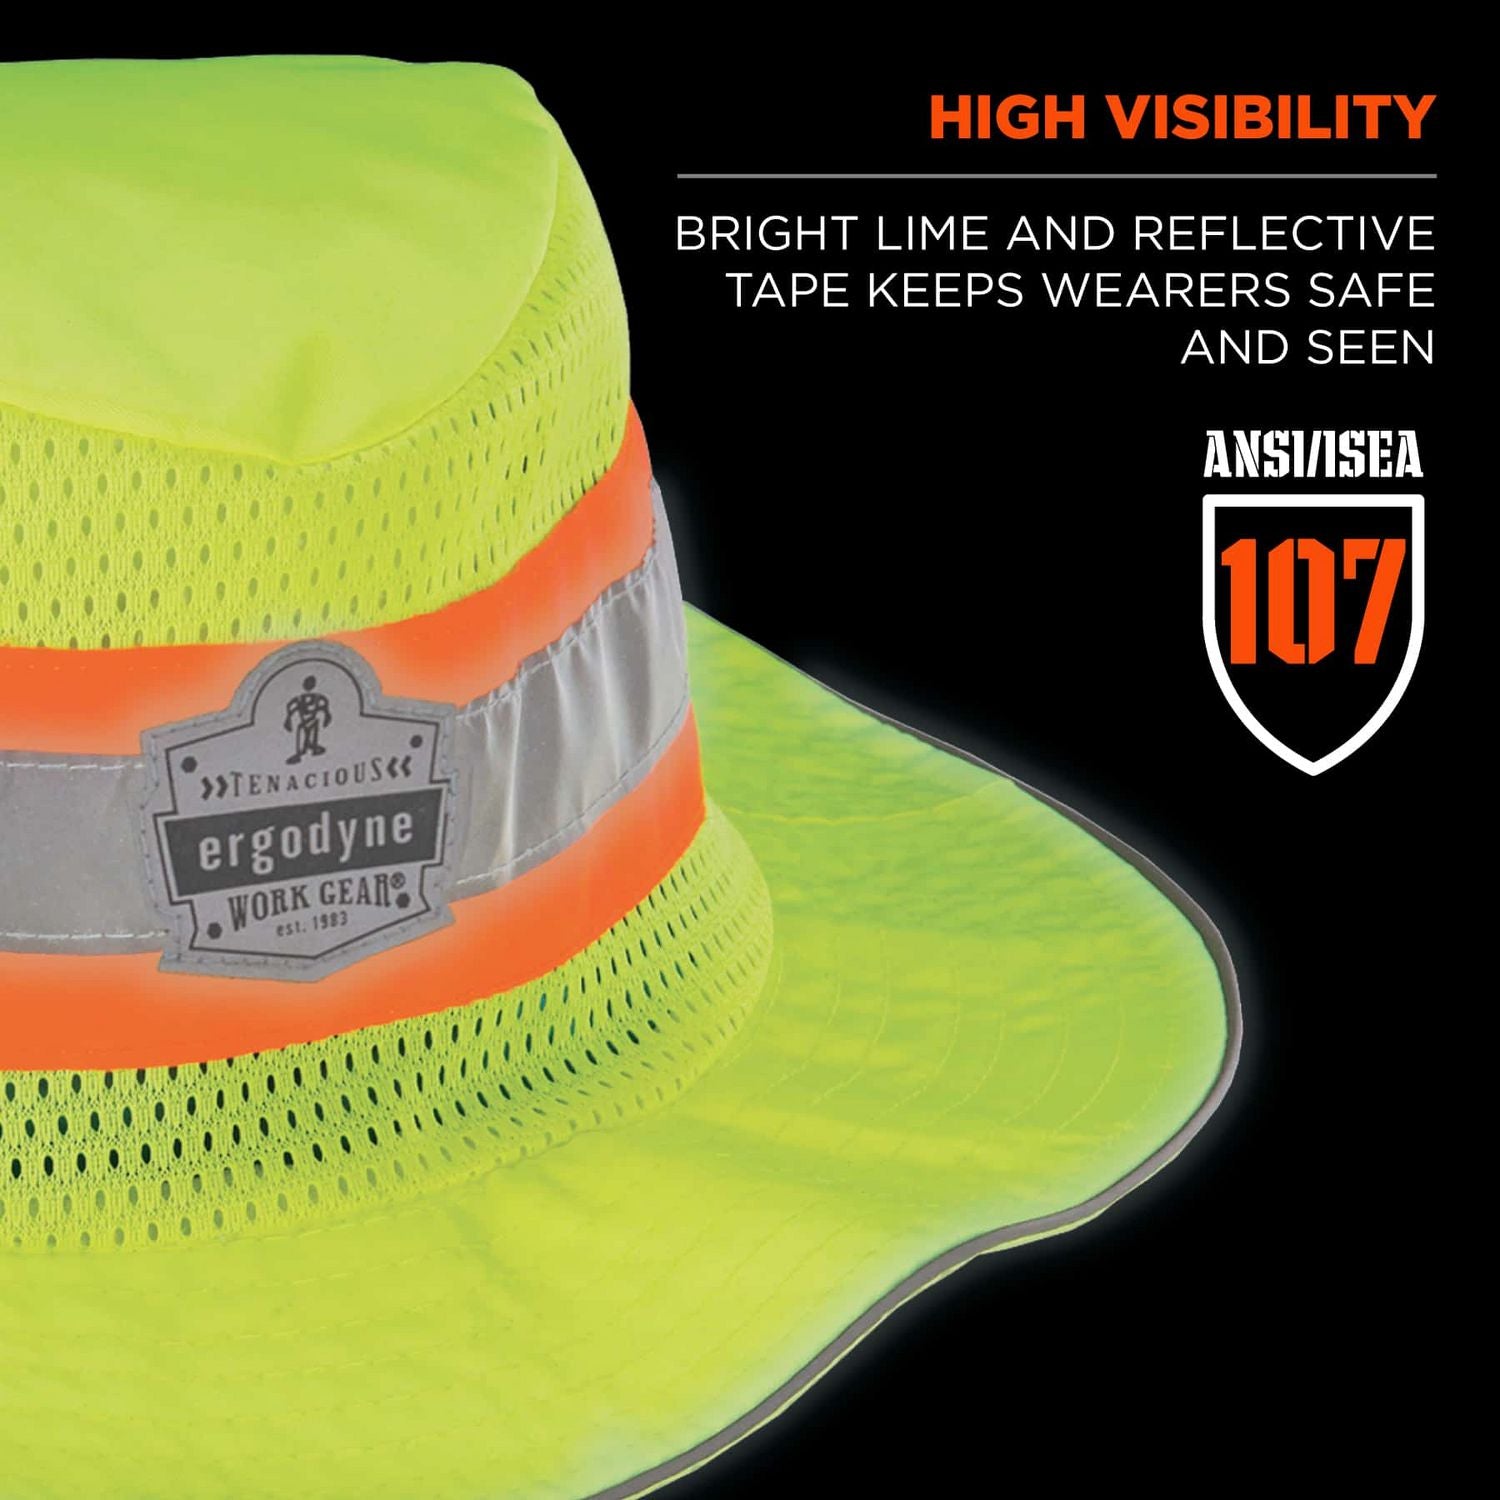 chill-its-8935ct-hi-vis-pva-ranger-sun-hat-polyester-pva-2x-large-3x-large-lime-ships-in-1-3-business-days_ego12600 - 4